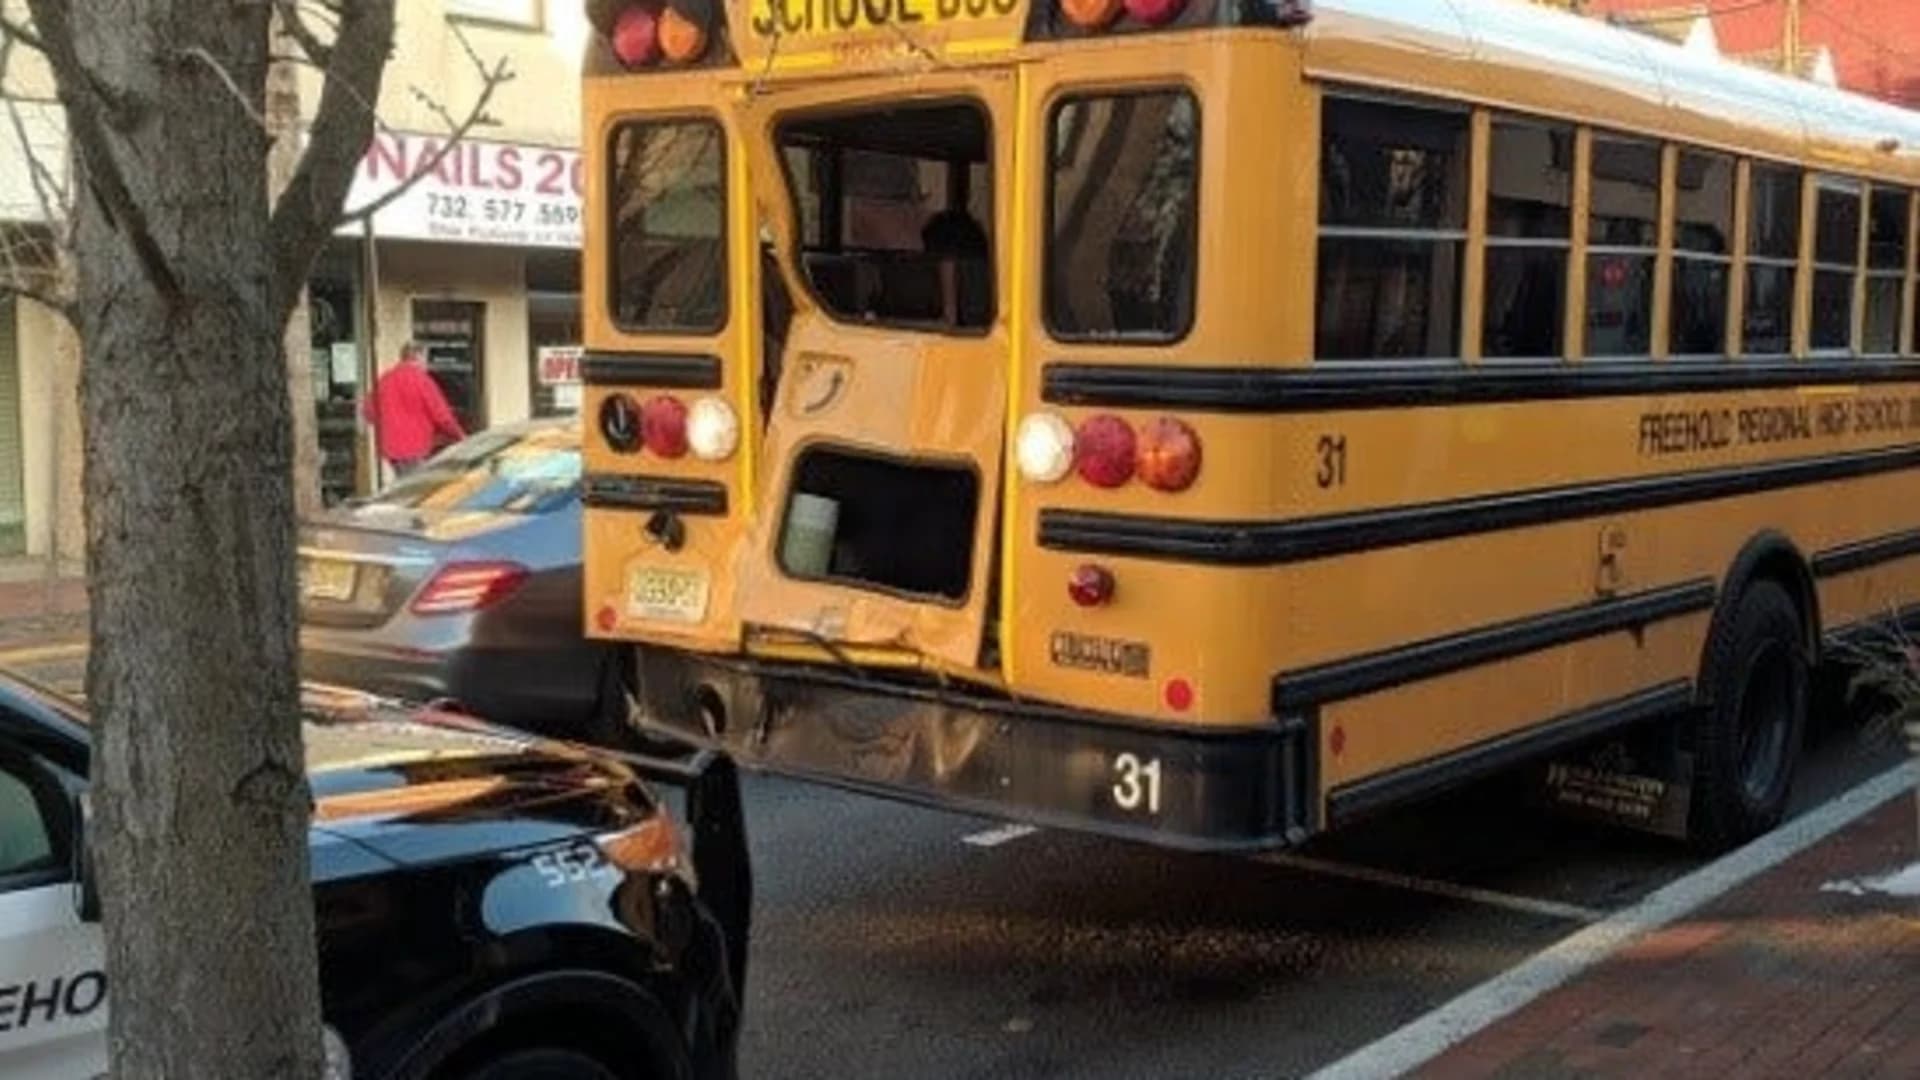 Students checked out by EMTs following recycling truck, school bus crash